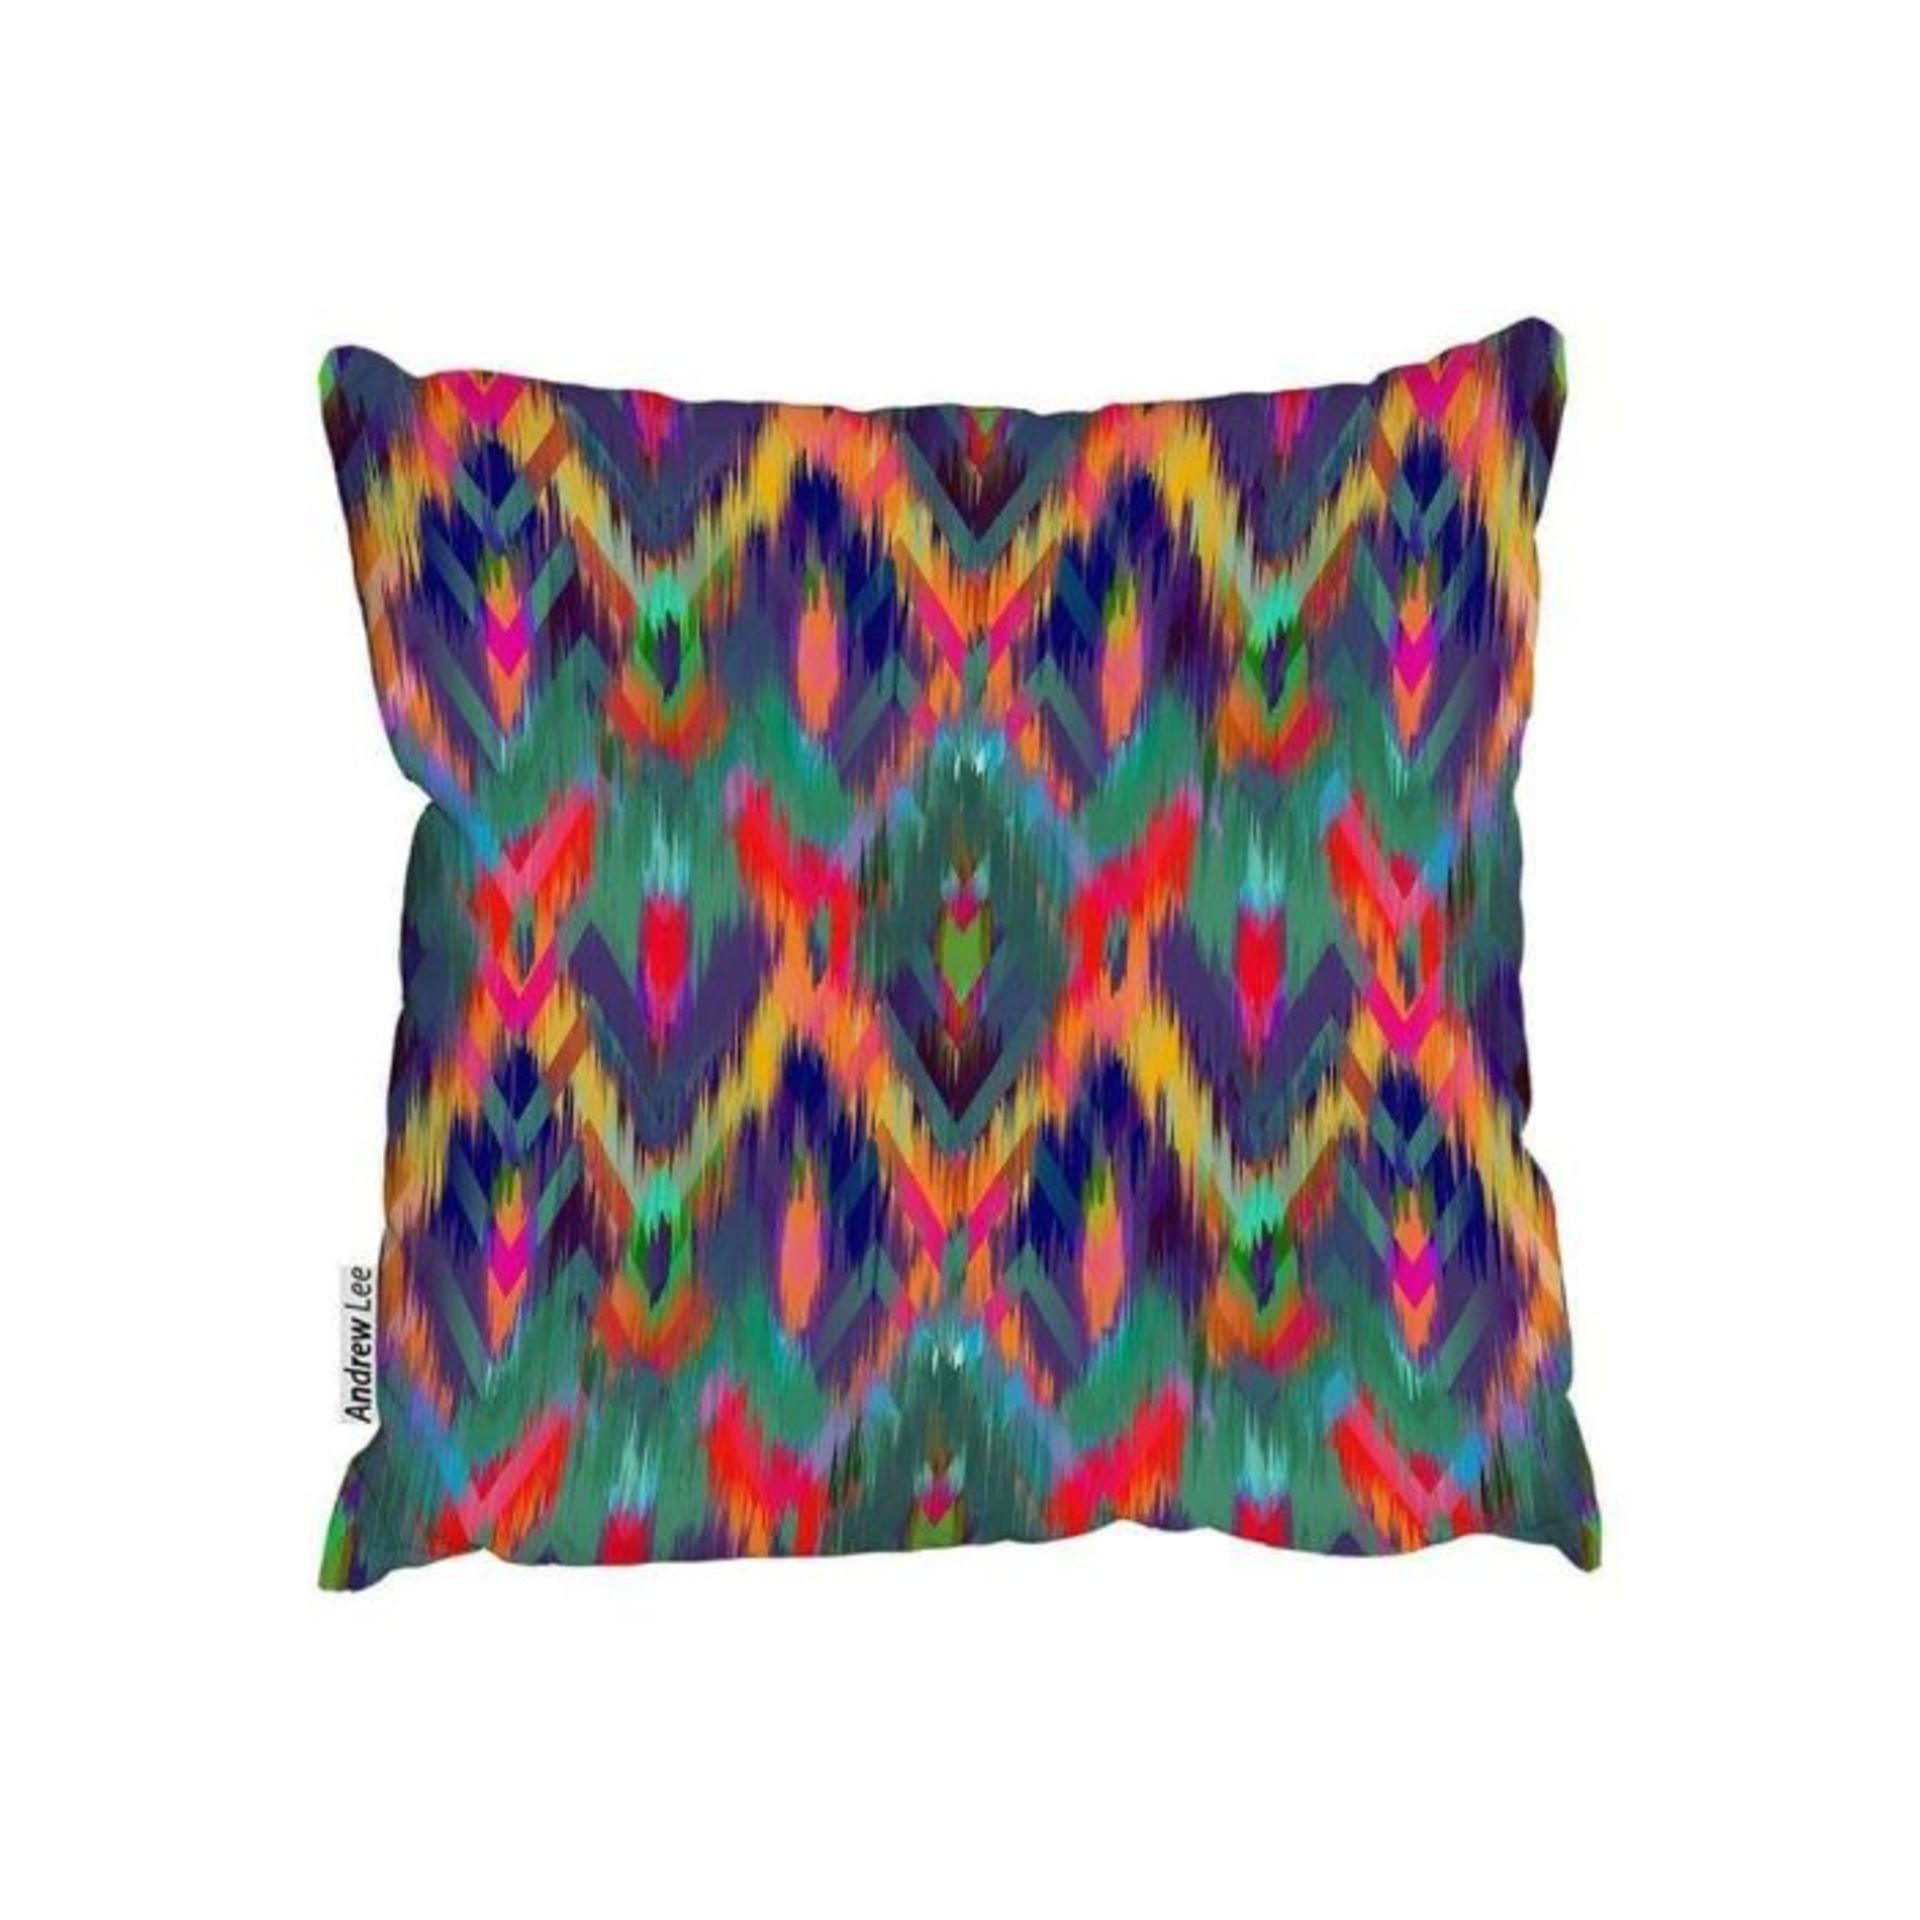 Andrew Lee, Abstract Ethnic Ikat Pattern Outdoor Cushion - RRP£52.99(BBOH3966 - 29435/126) - Image 3 of 4